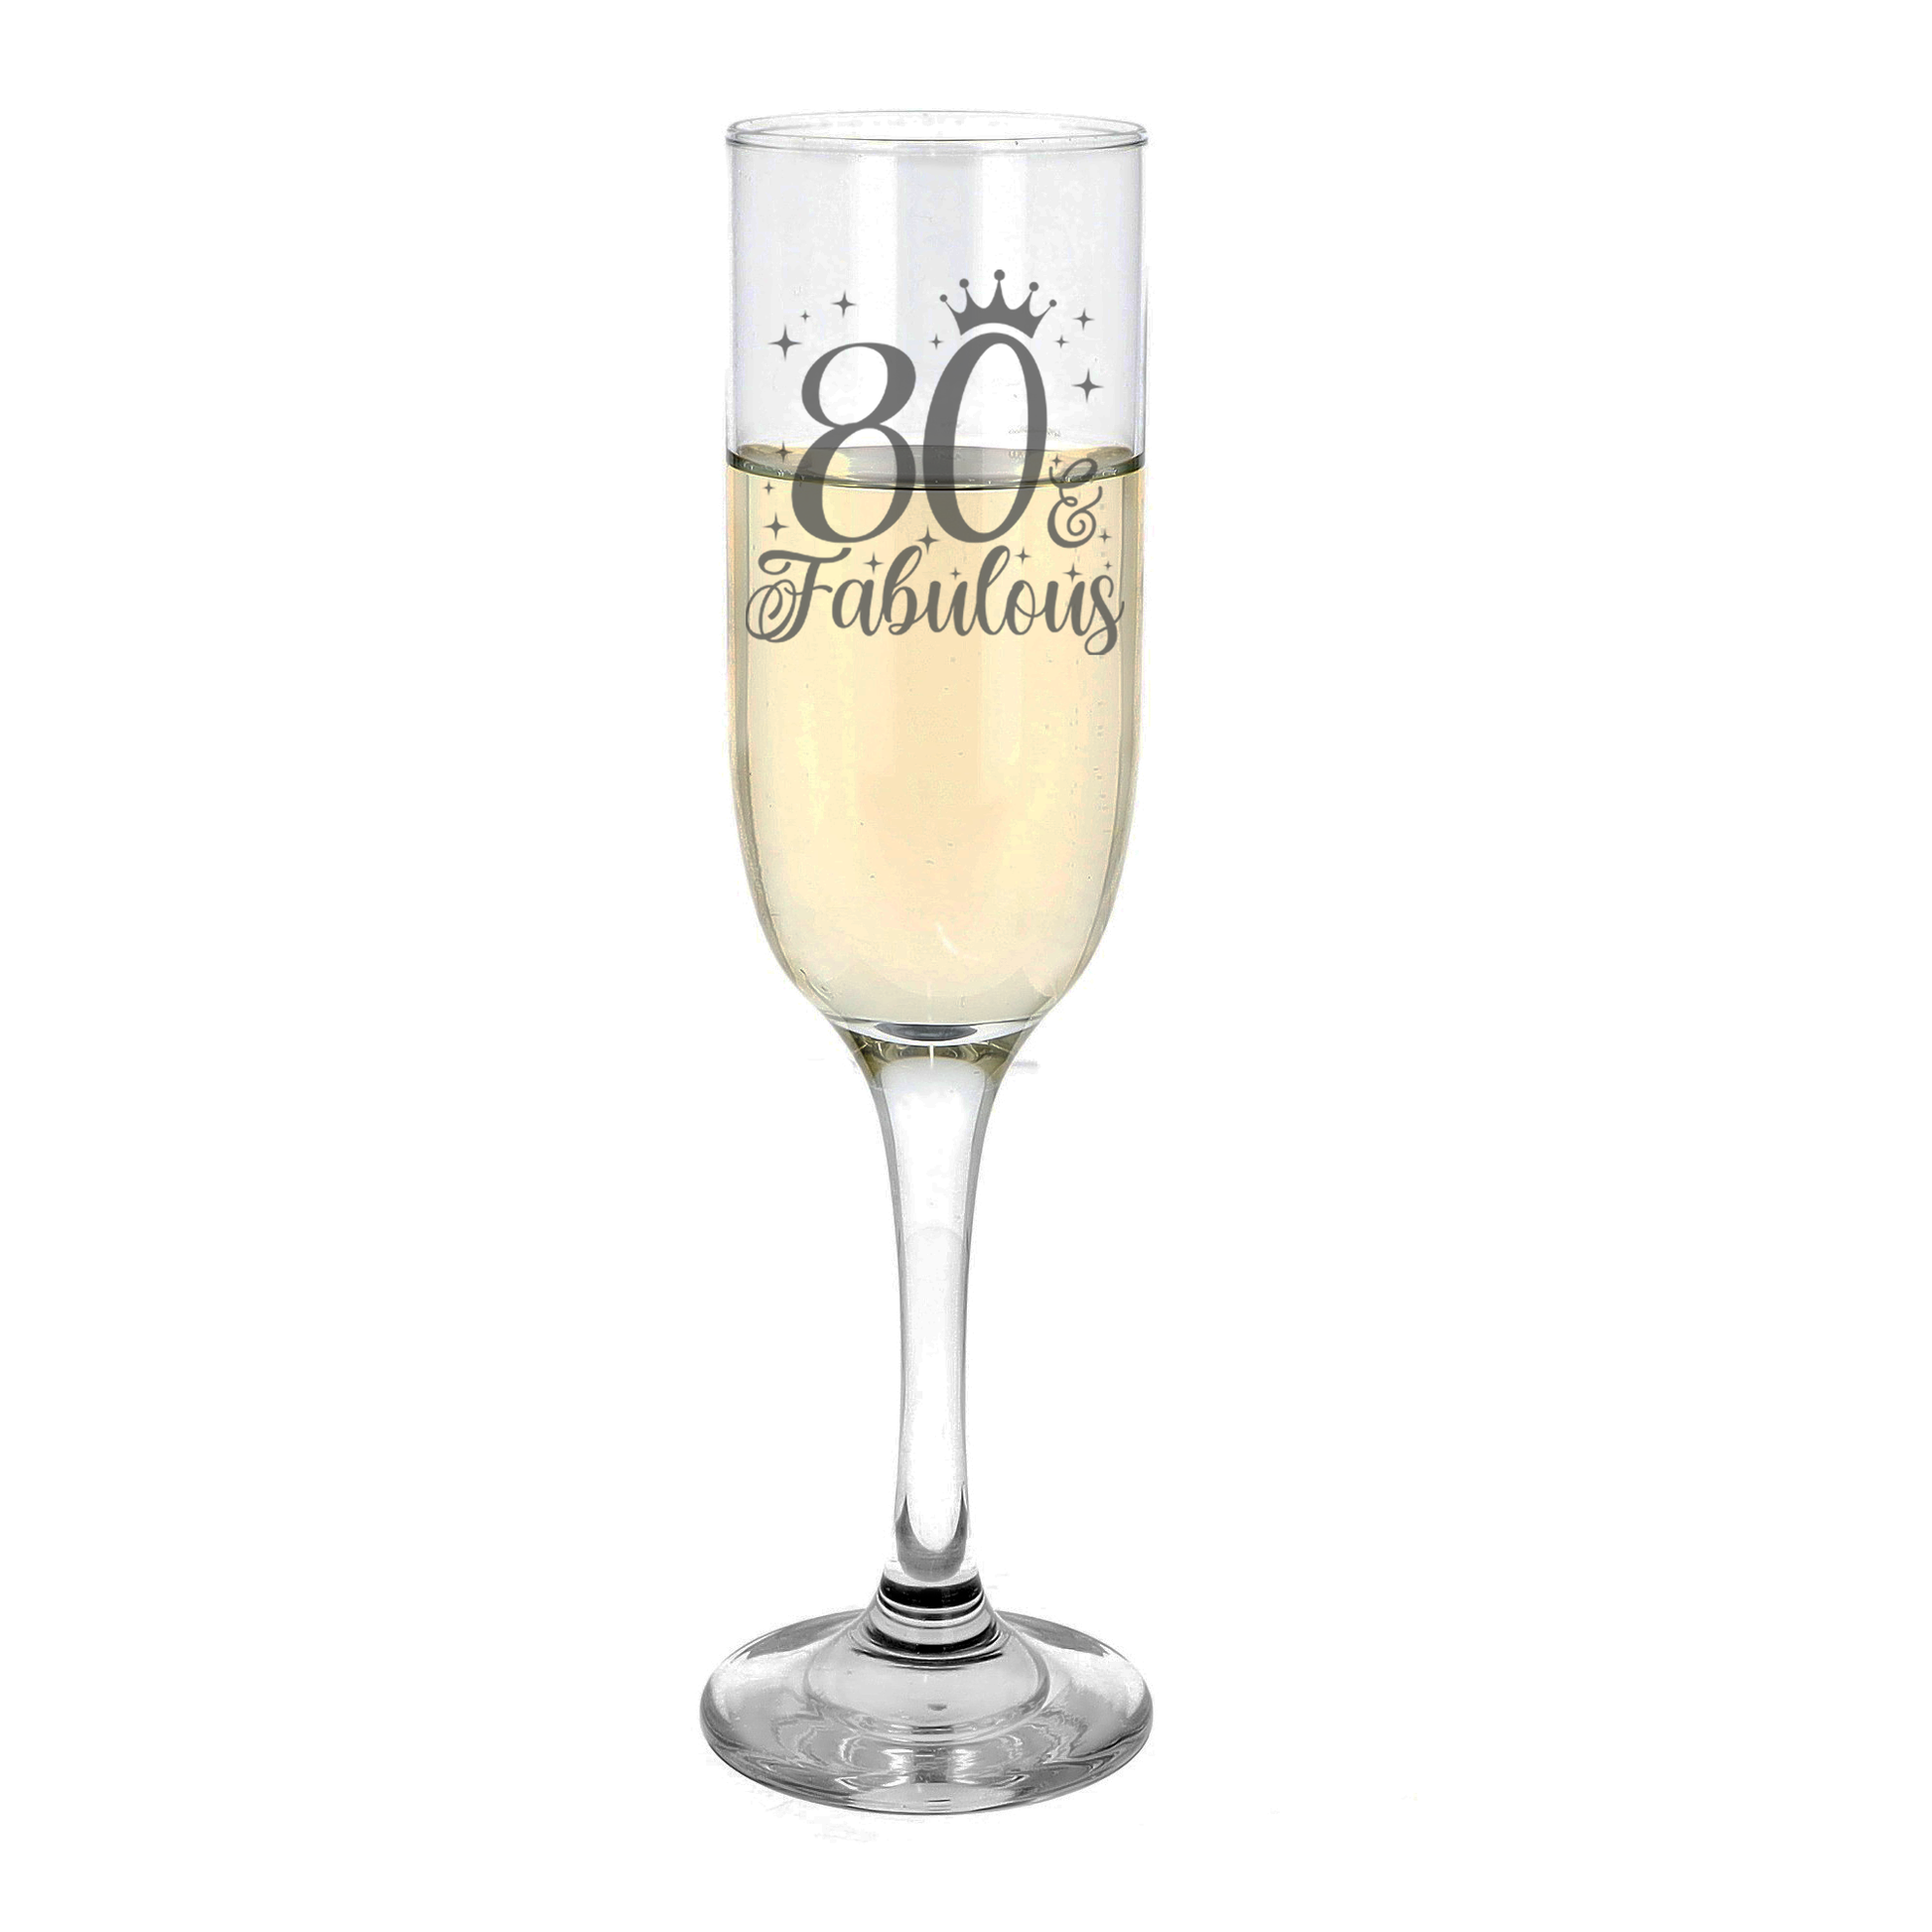 80 & Fabulous Engraved Champagne Glass and/or Coaster Set  - Always Looking Good -   